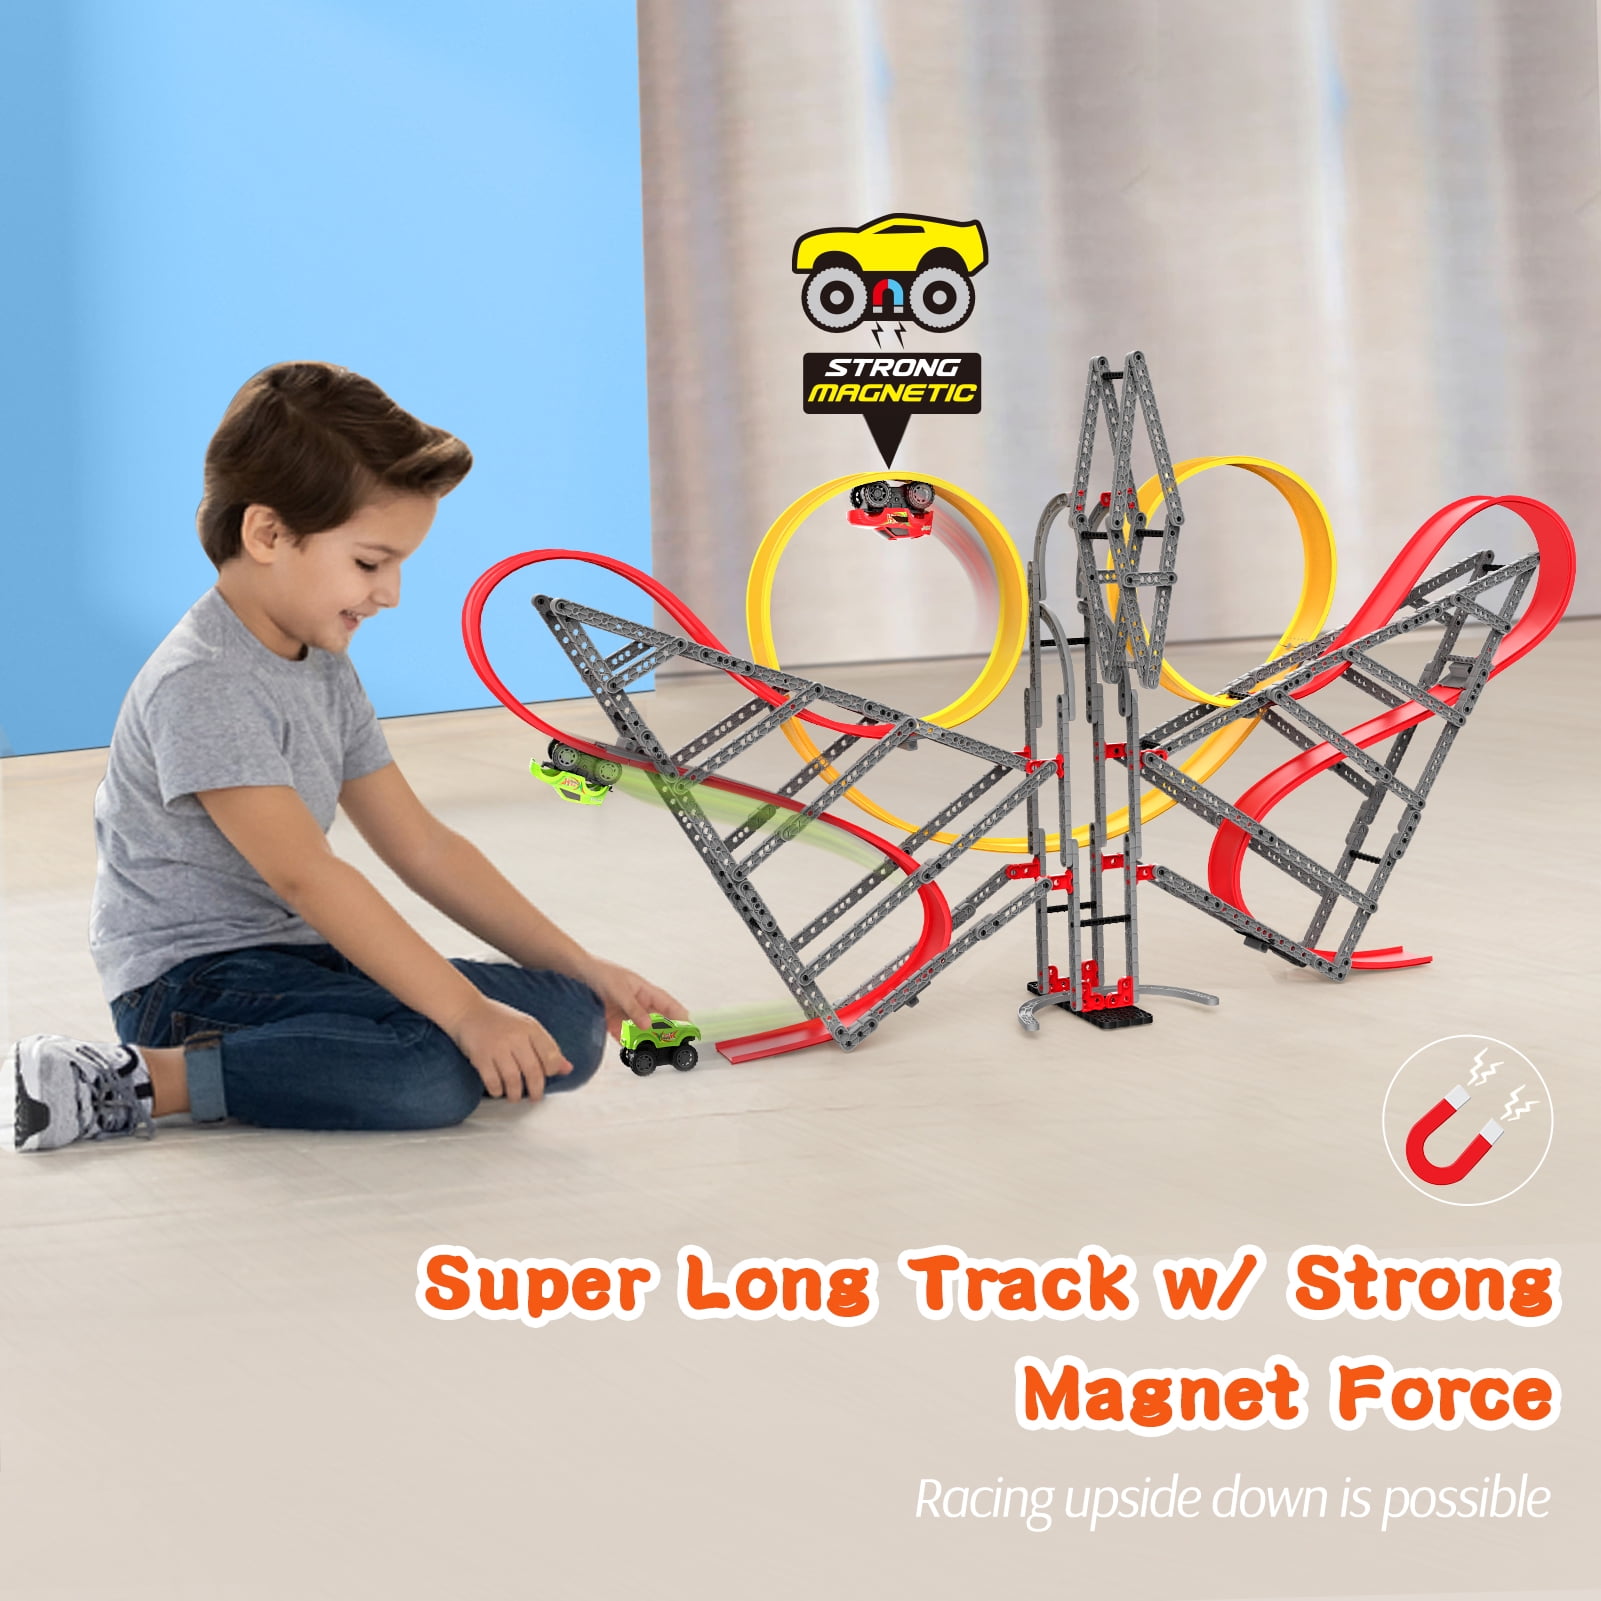 Loop Speedway with 2 High-Speed Race Car Educational Engineering Model Kit for STEM Training 357 pcs Building Blocks FORTY4 Electric Race Track for 3 4 5 6 7 8 Years Old Toddlers Boys and Girls 